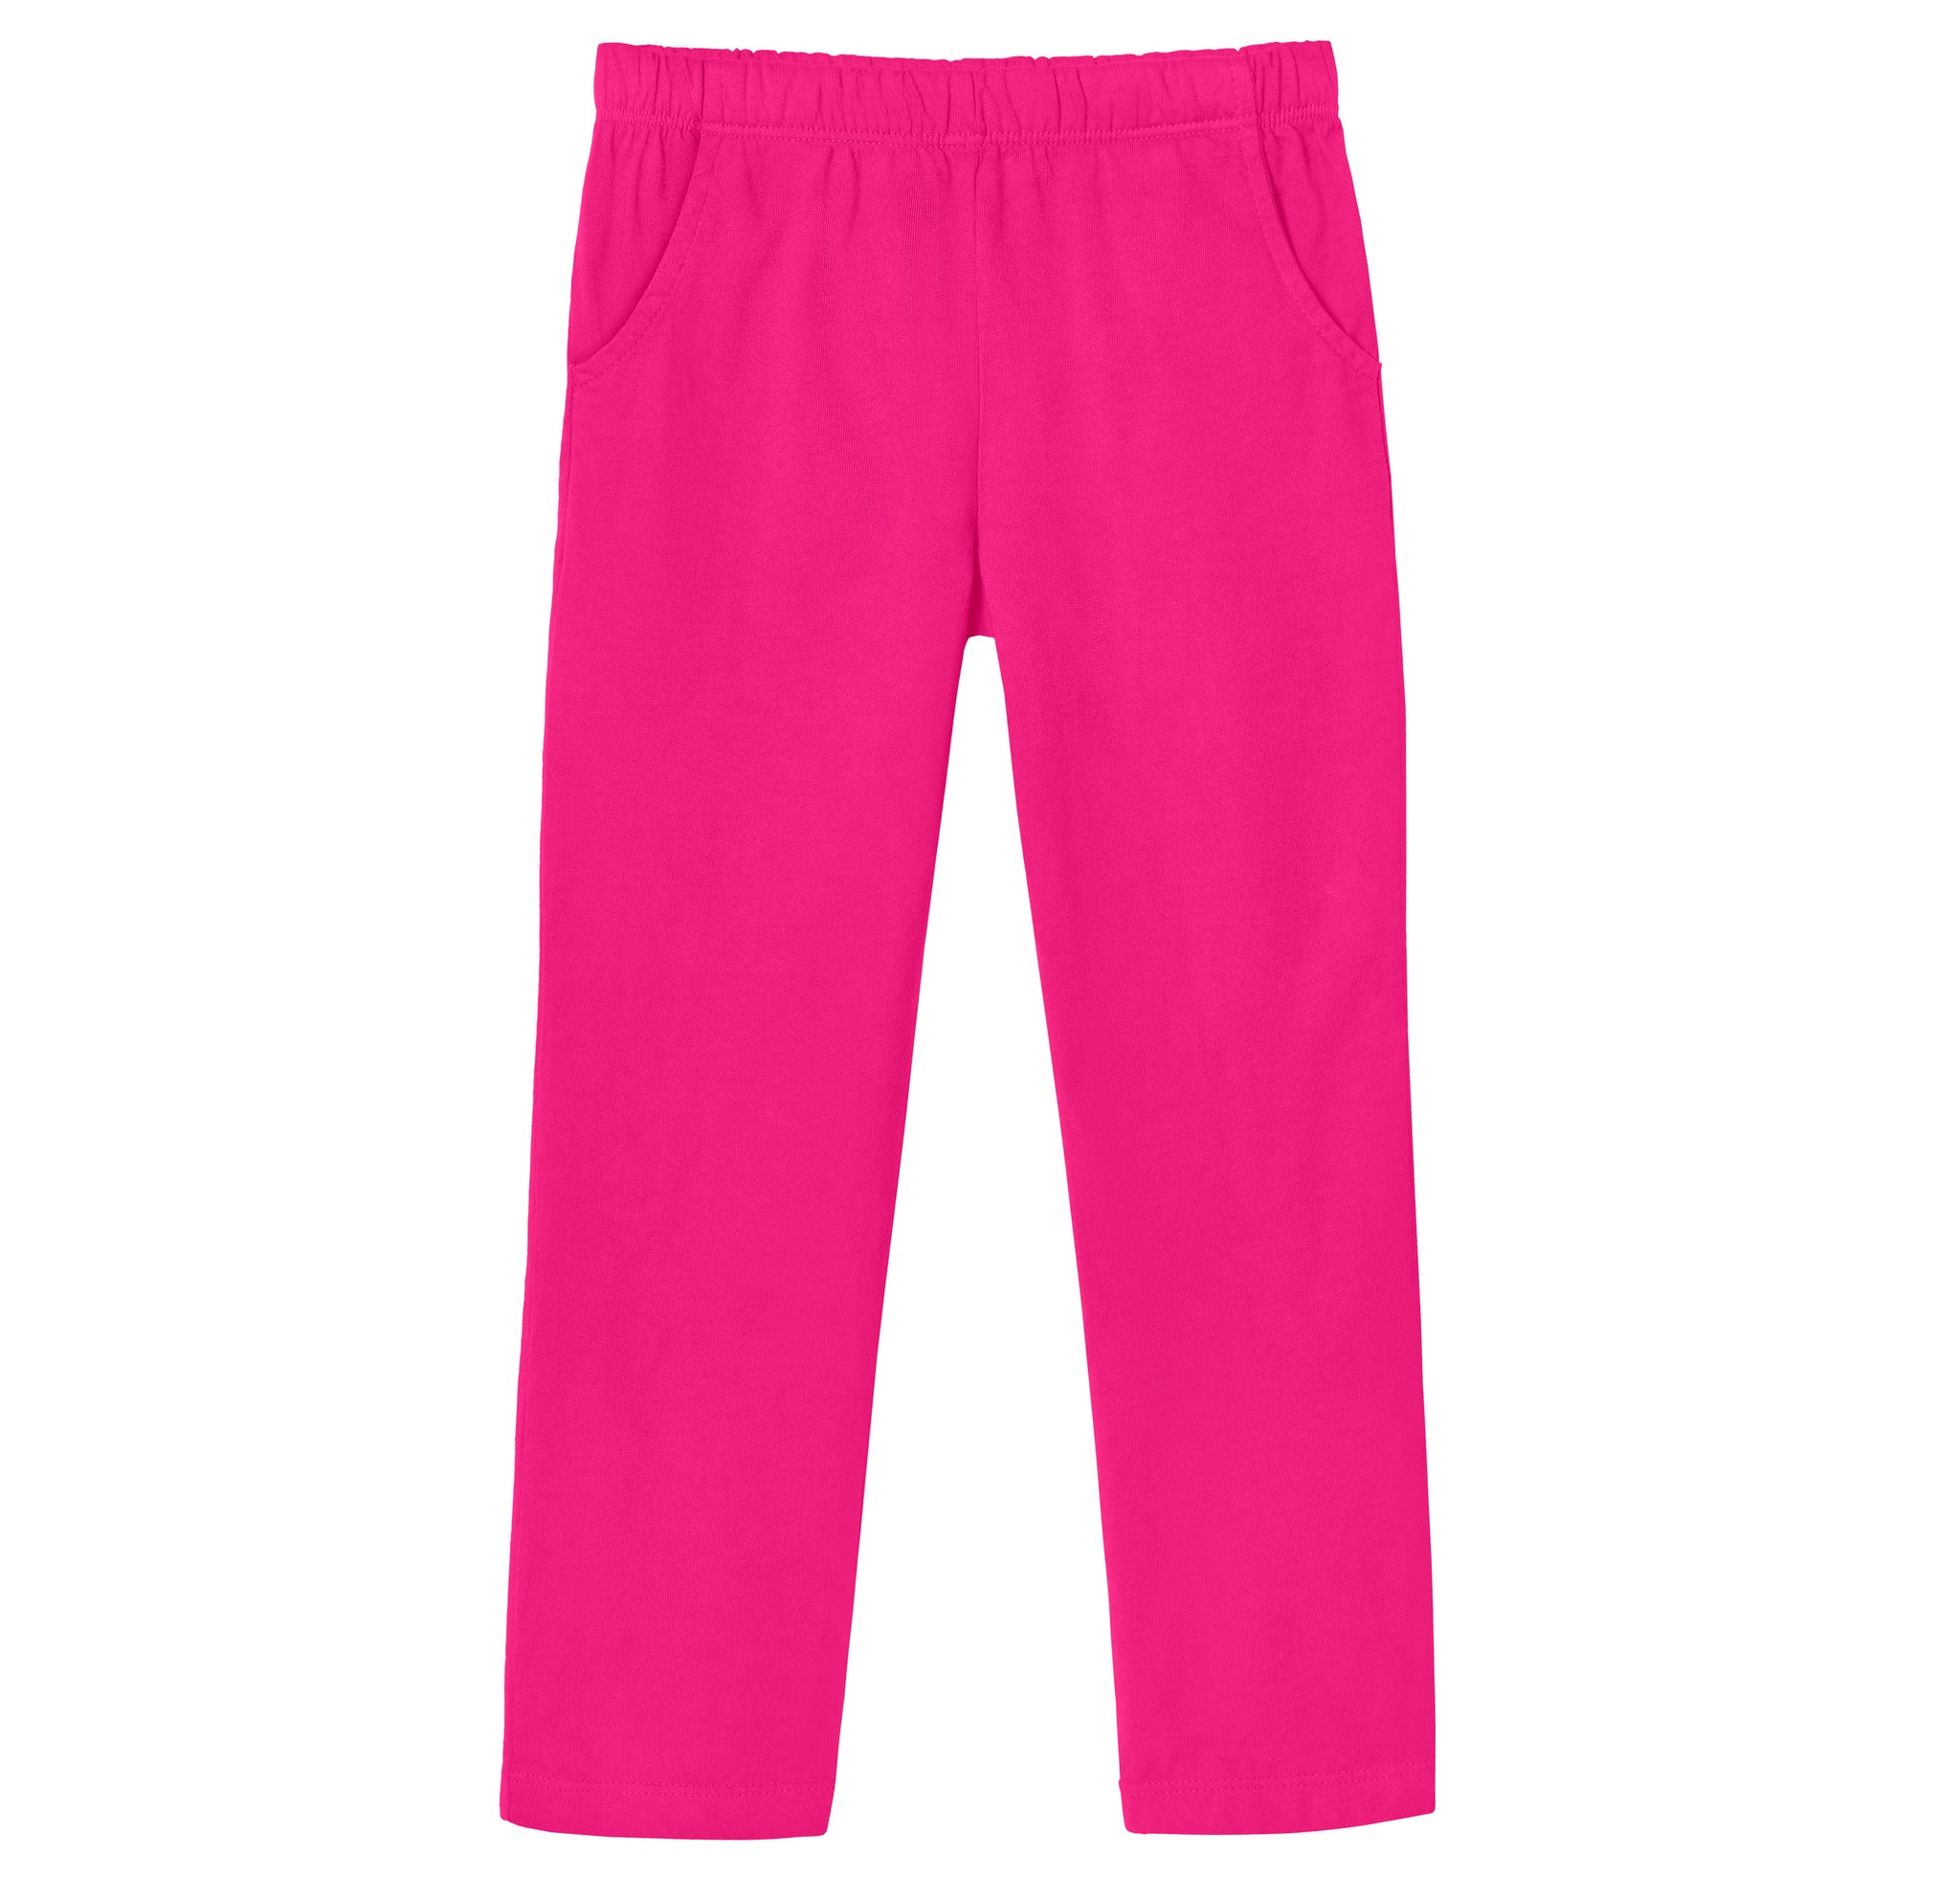 Jyeity Girls Fashion,POROPL Sexy Short Sleeve Solid Color Pants